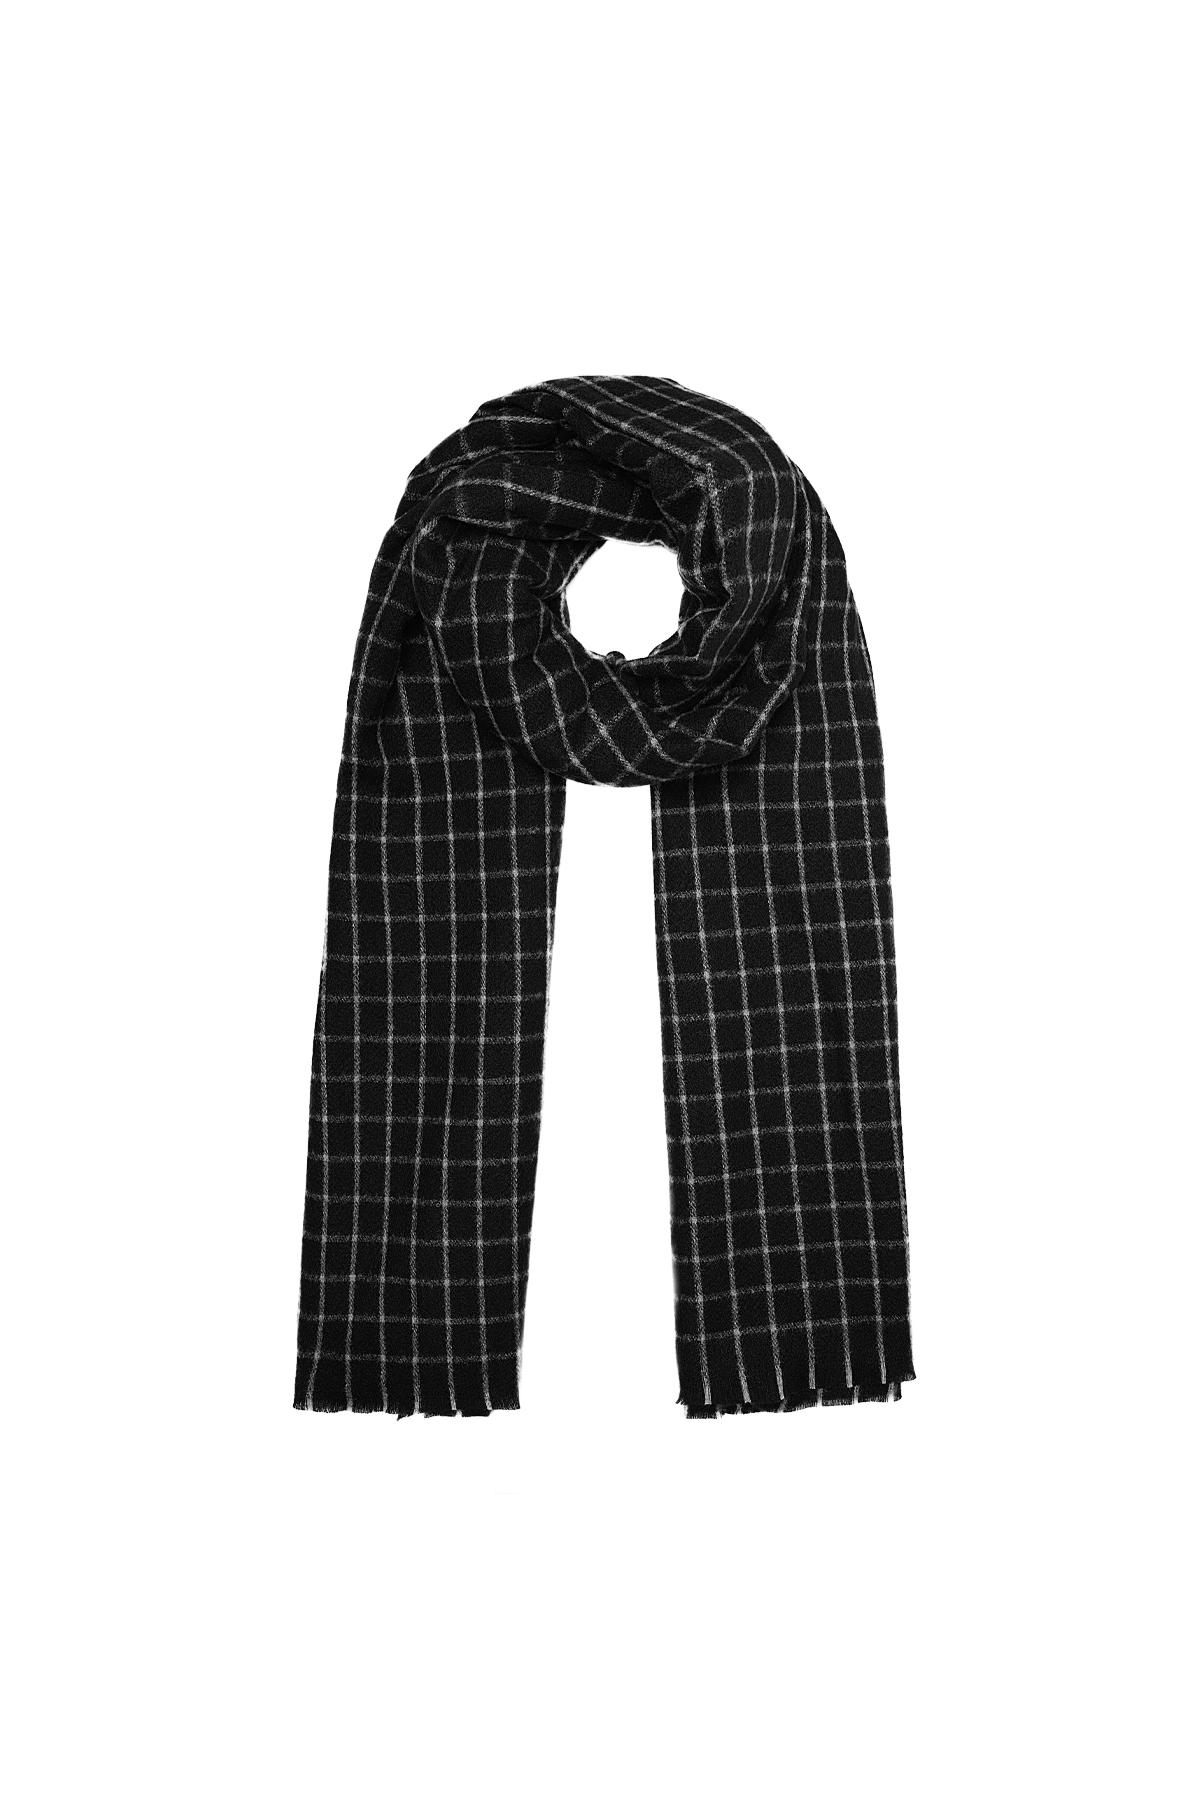 Black and white checkered winter scarf Acrylic h5 